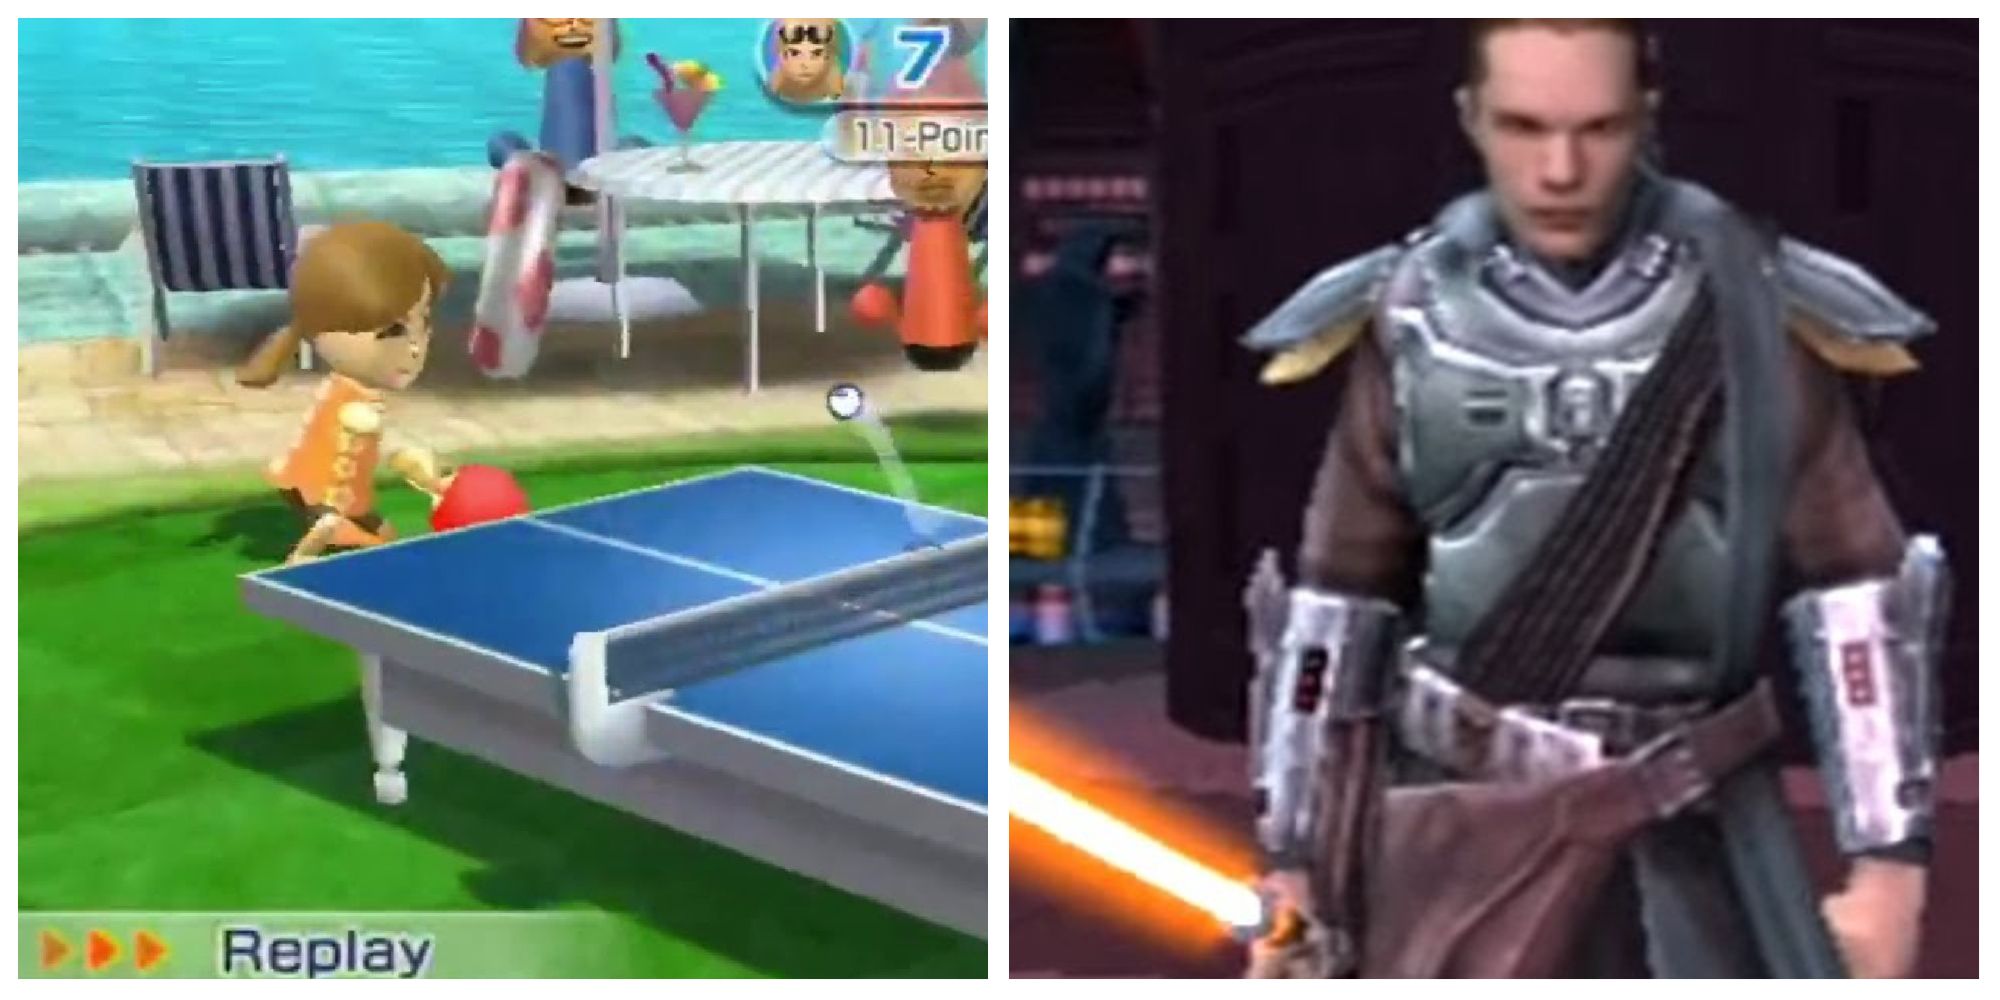 Left: Table Tennis from Wii Sports Resort: Right: Starkiller from Star Wars: The Force Unleashed. Image Sources: GameRant.com and reddit.com